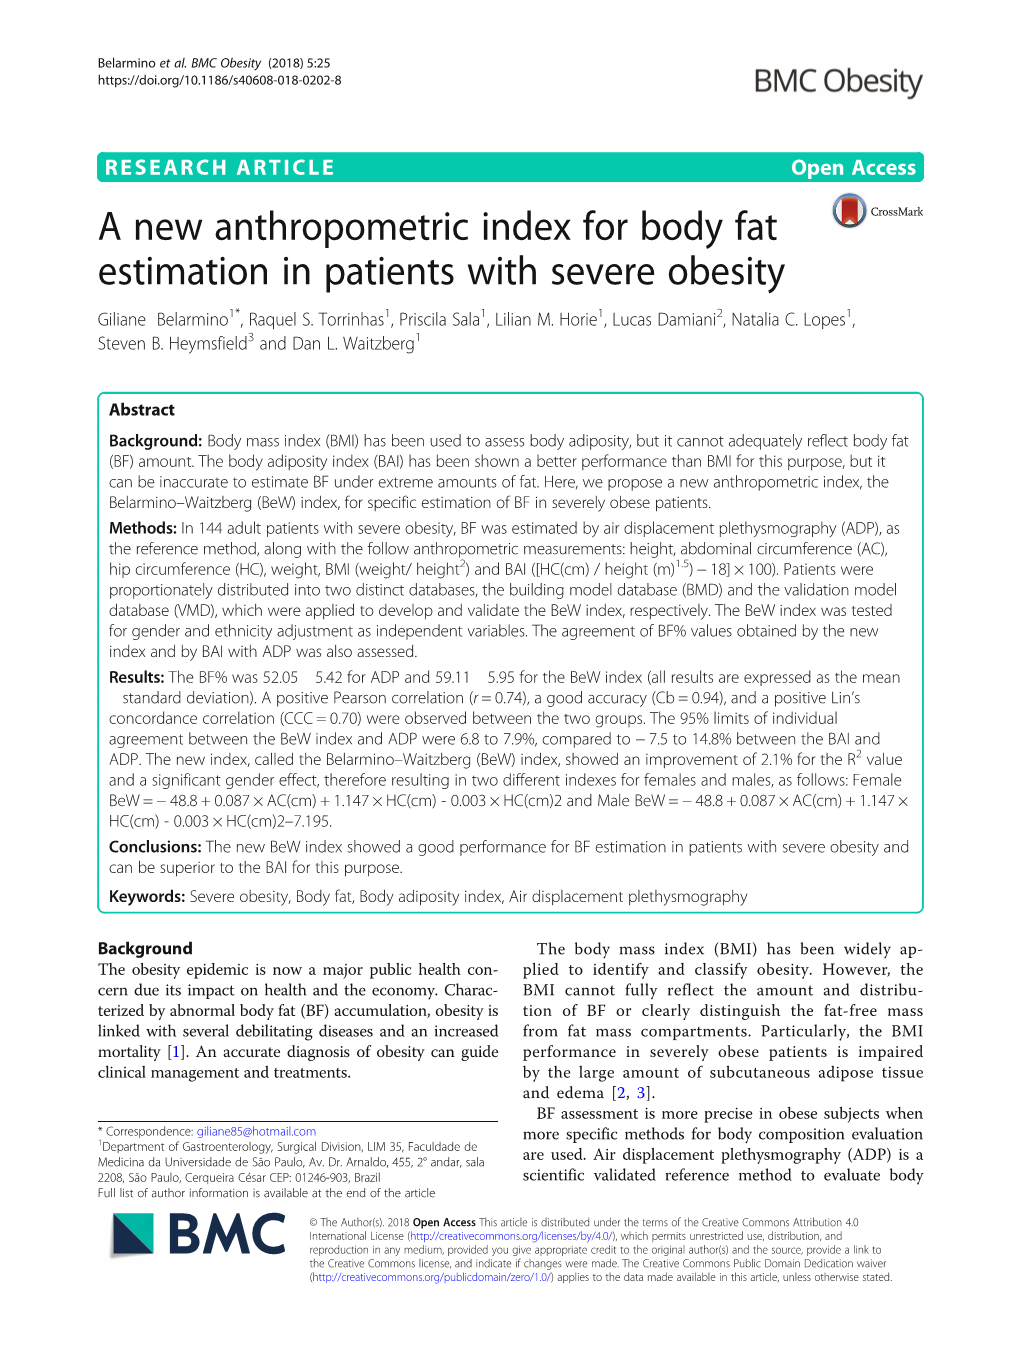 A New Anthropometric Index for Body Fat Estimation in Patients with Severe Obesity Giliane Belarmino1*, Raquel S